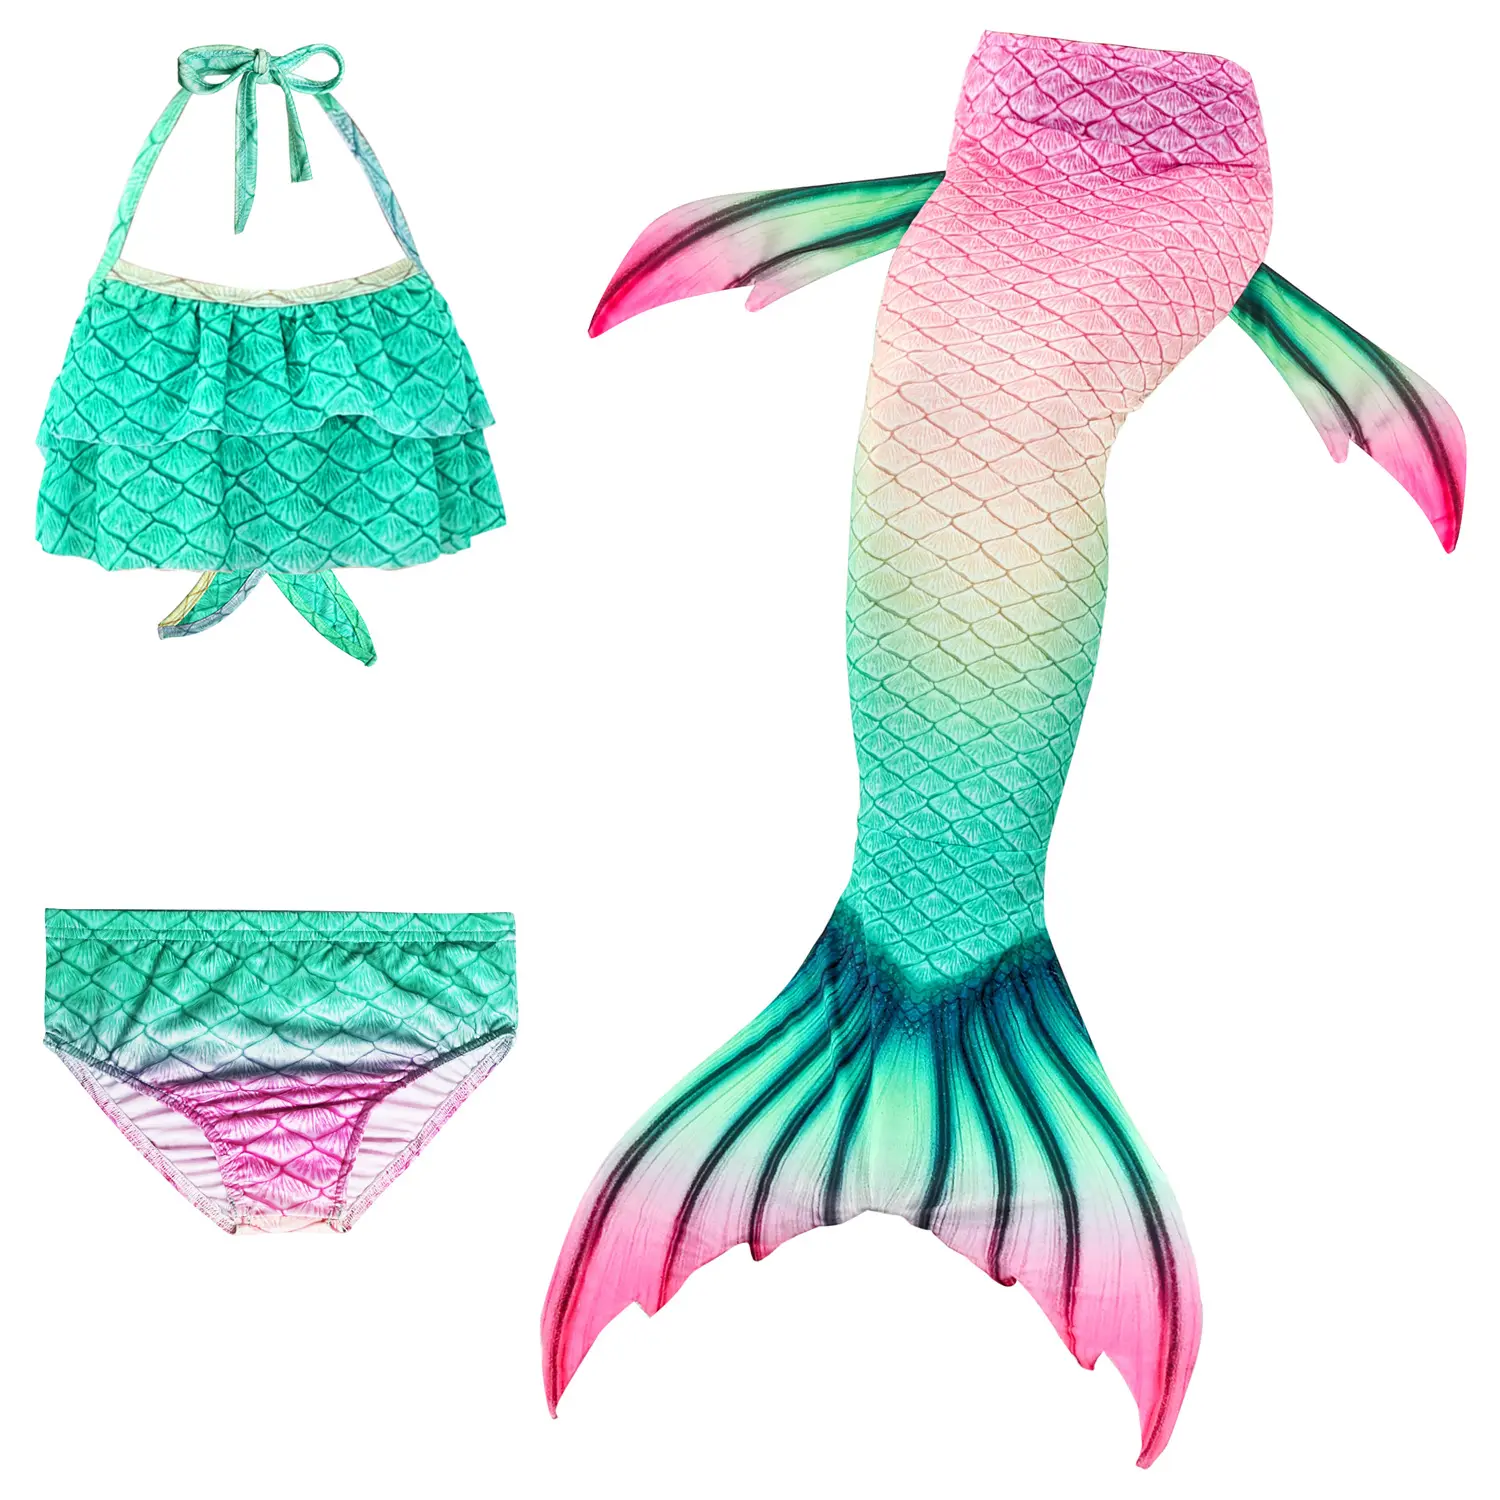 Kids Girls Mermaid Tails with Fin Swimsuit Bikini Bathing Suit Dress for Girls With Flipper Monofin For Swim Halloween cosplay